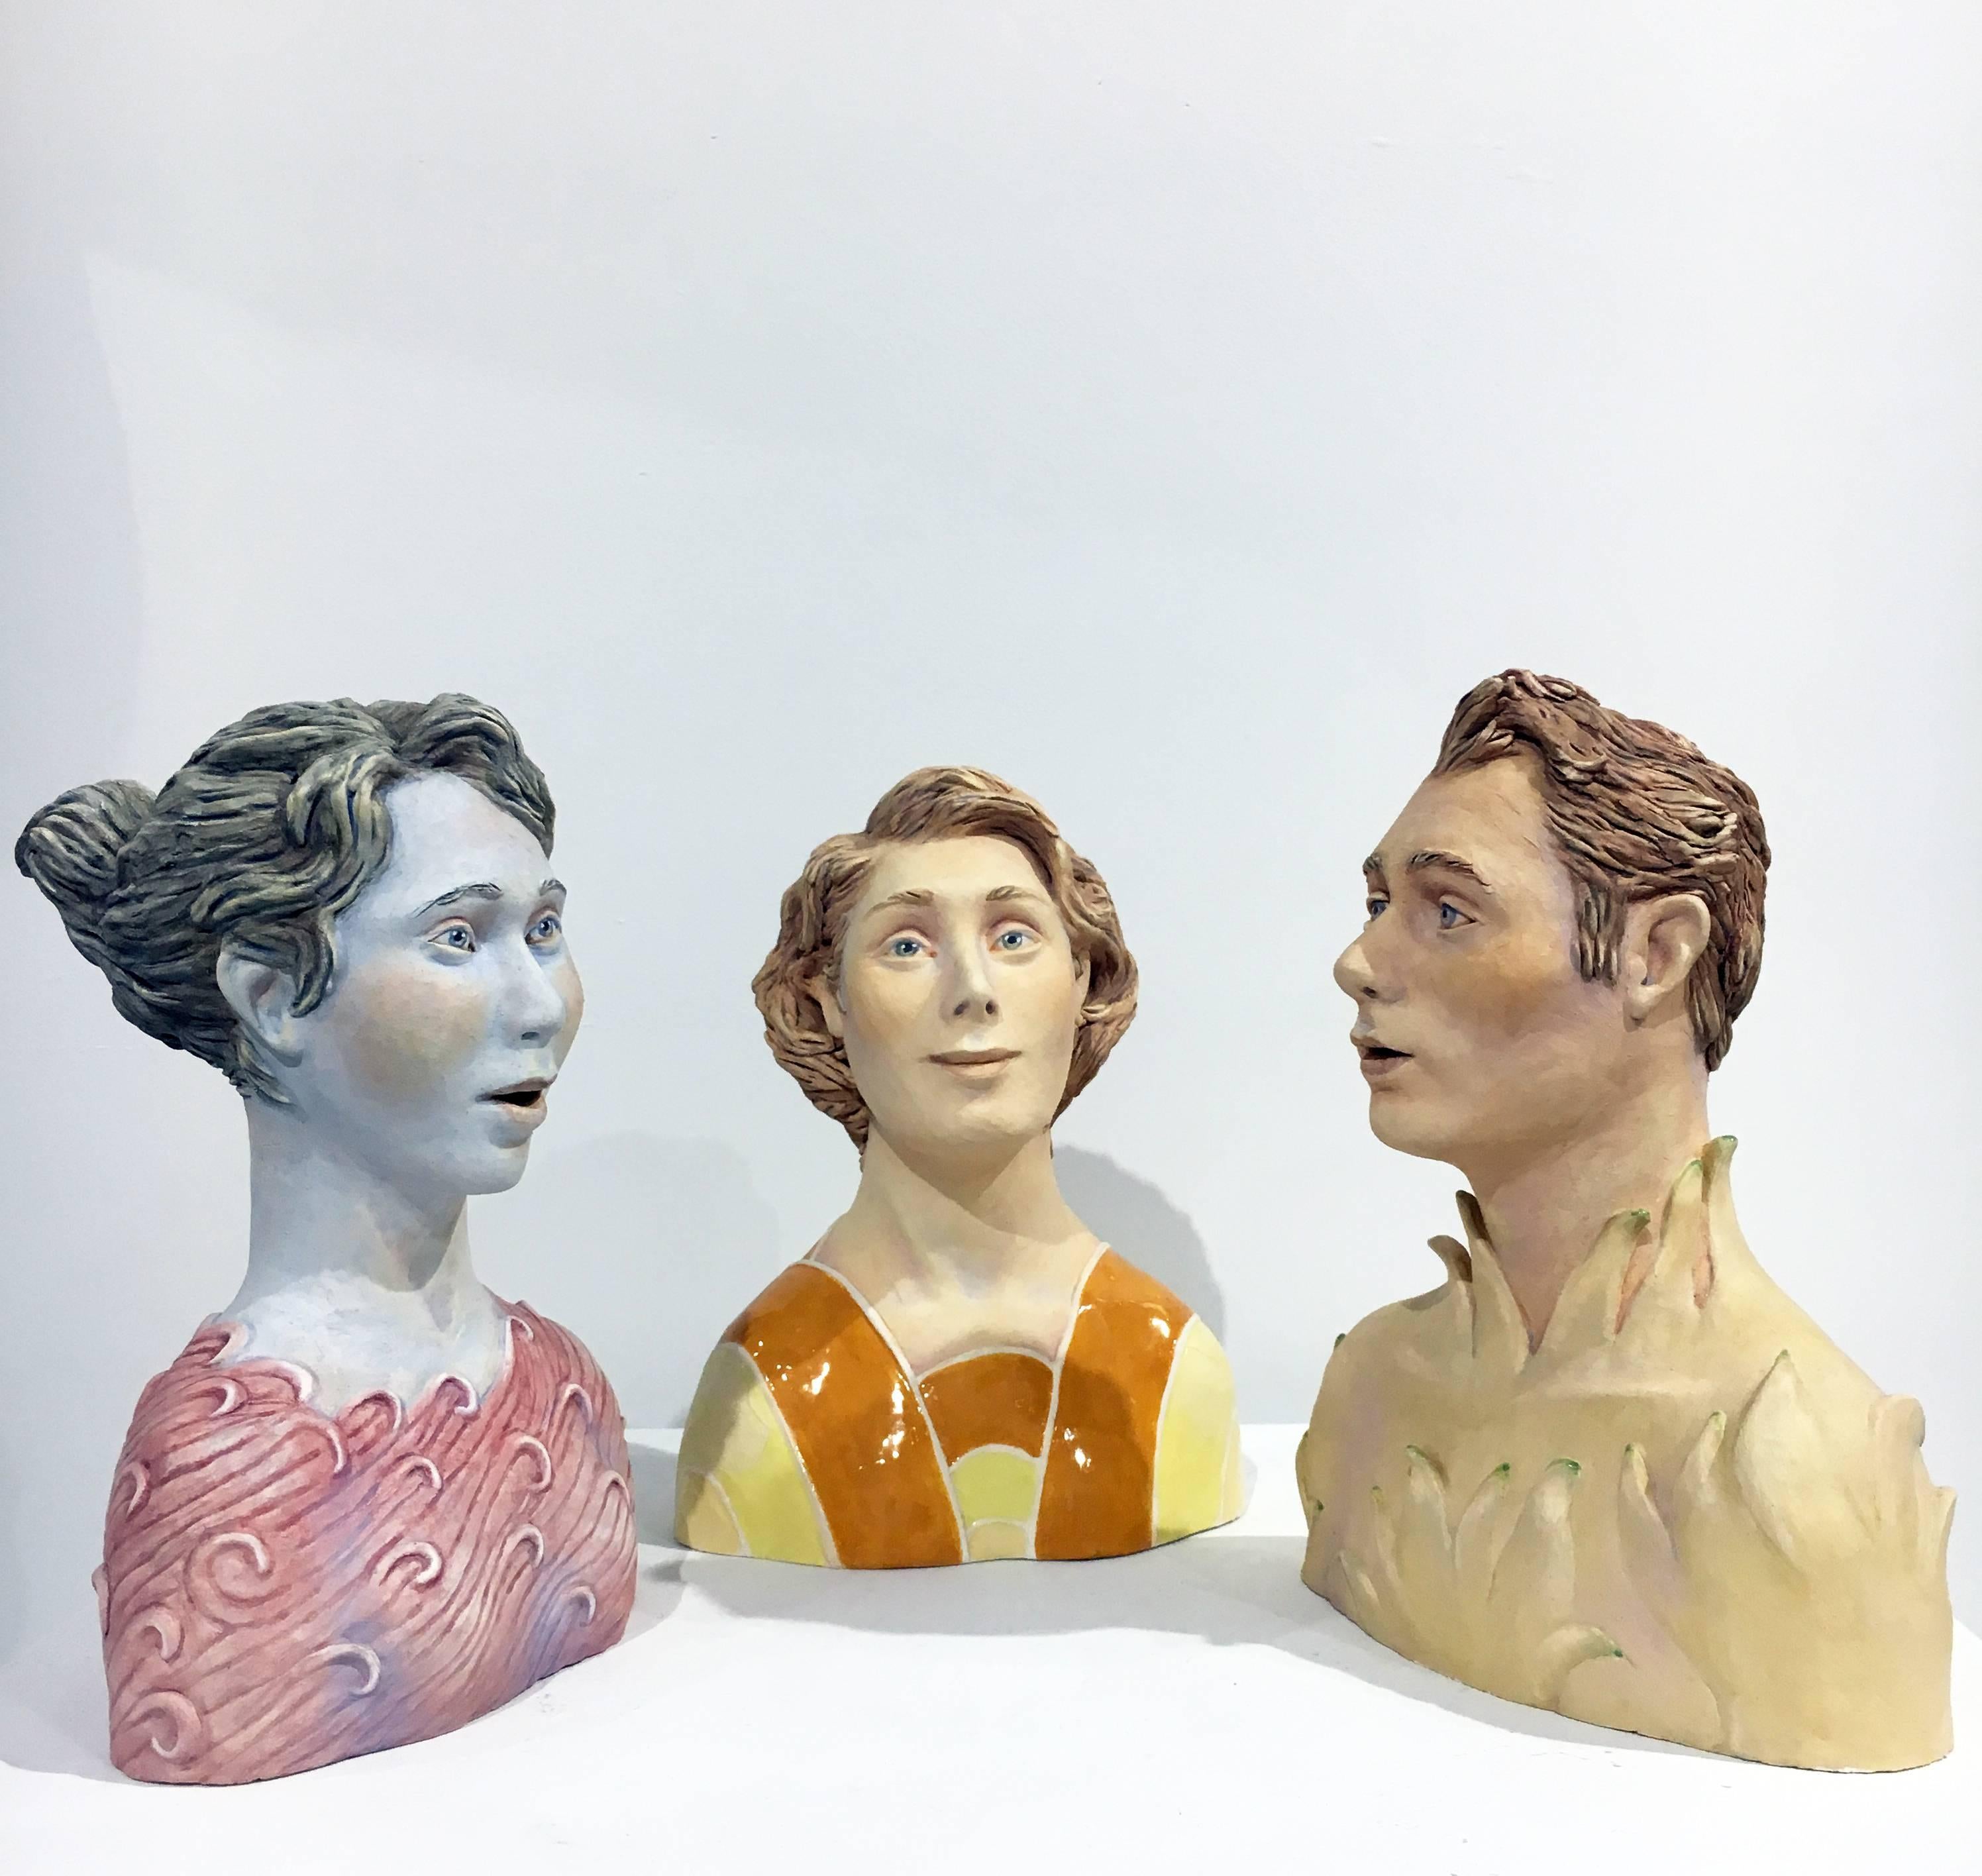 "Conversation: Grouping 3", Ceramic Figures Painted with Acrylics and Glazing - Mixed Media Art by Beverly Mayeri